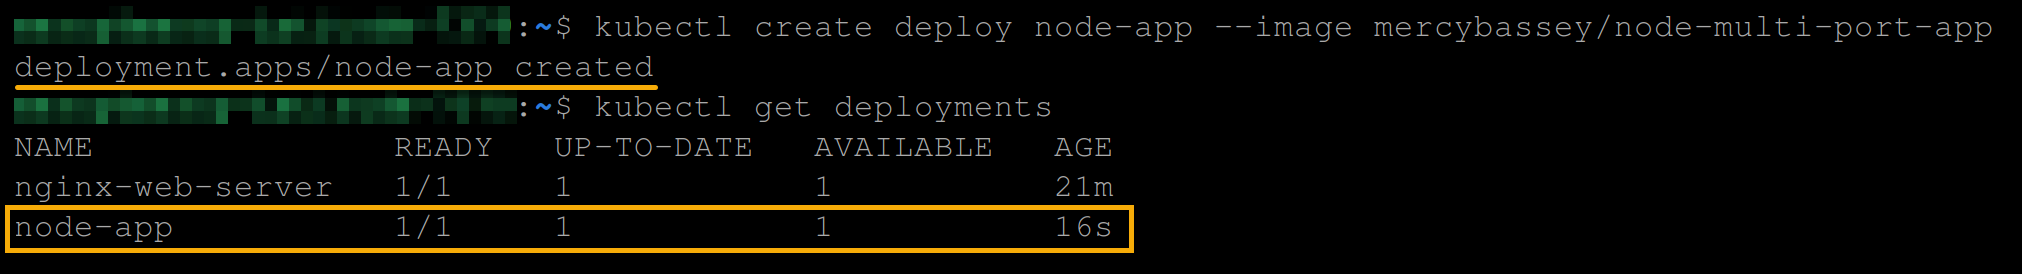 Creating and viewing an app (node-app) deployment